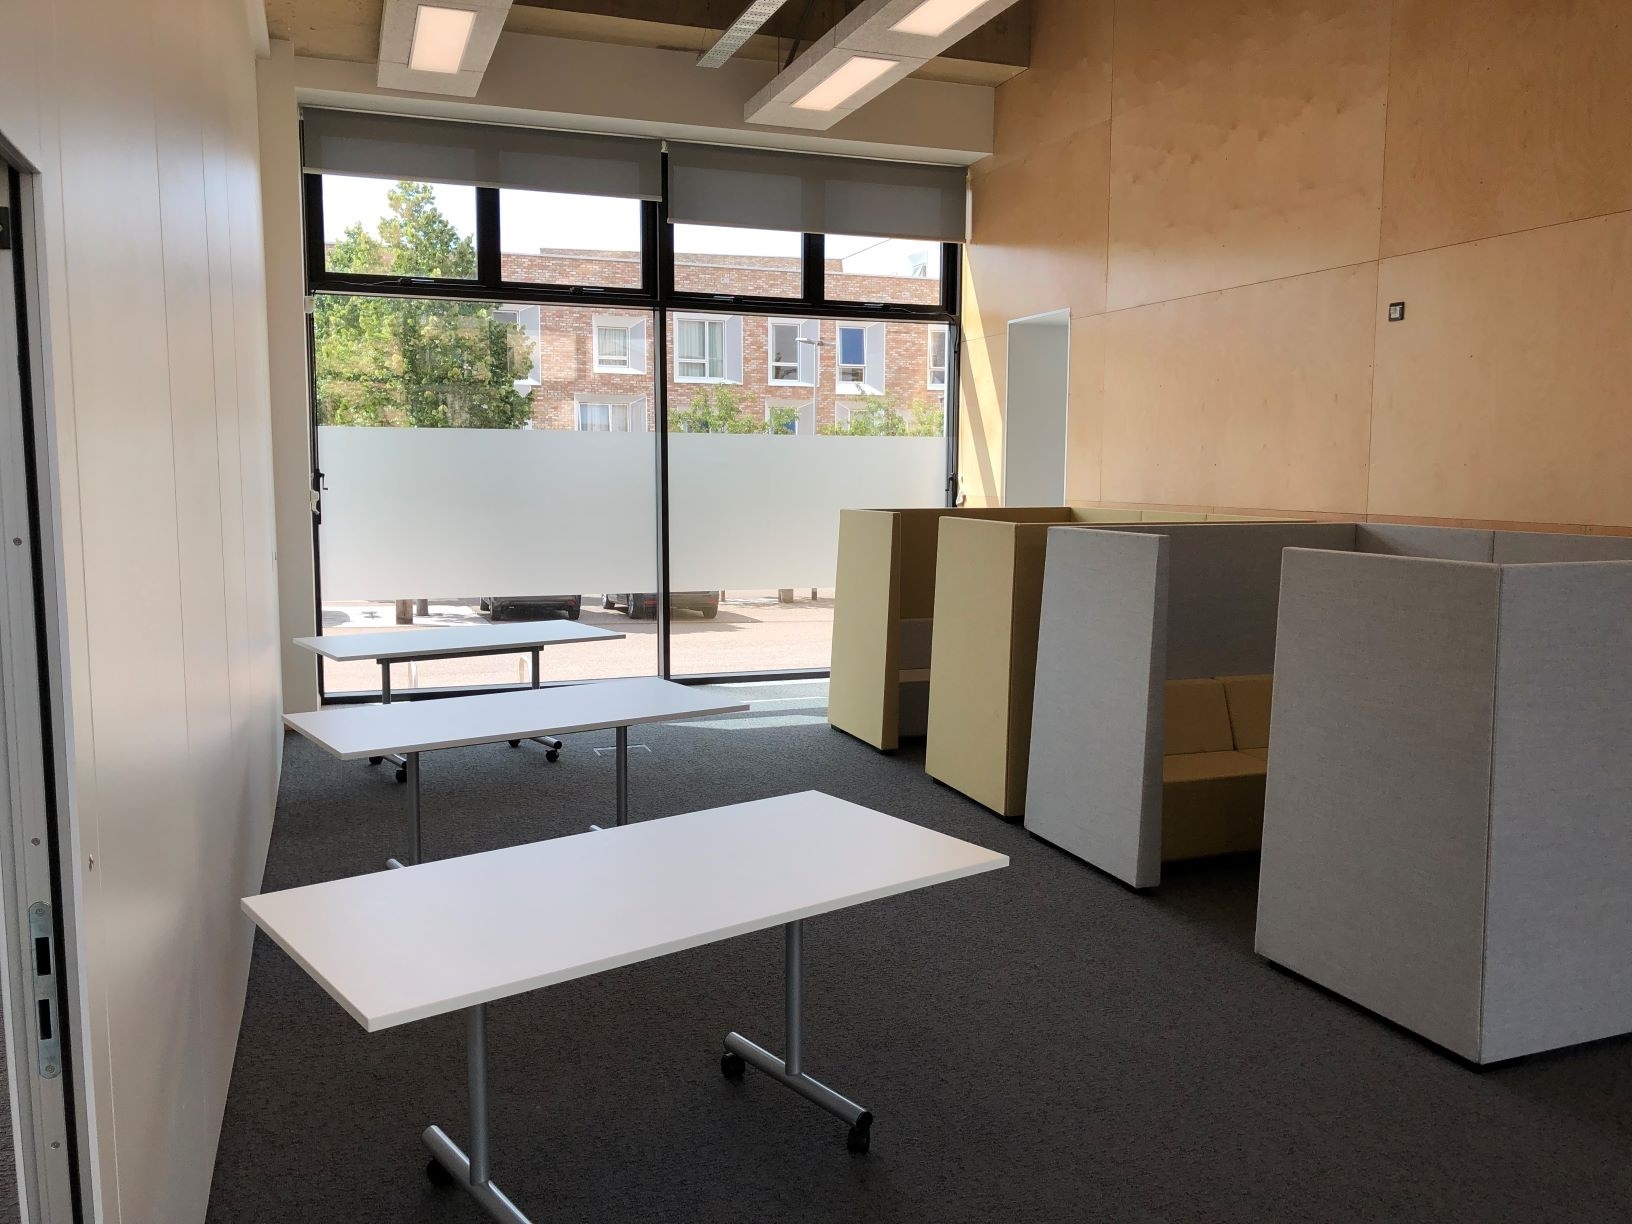 Photograph showing the breakout area of the Multi-Function Space - a large room with three tables.